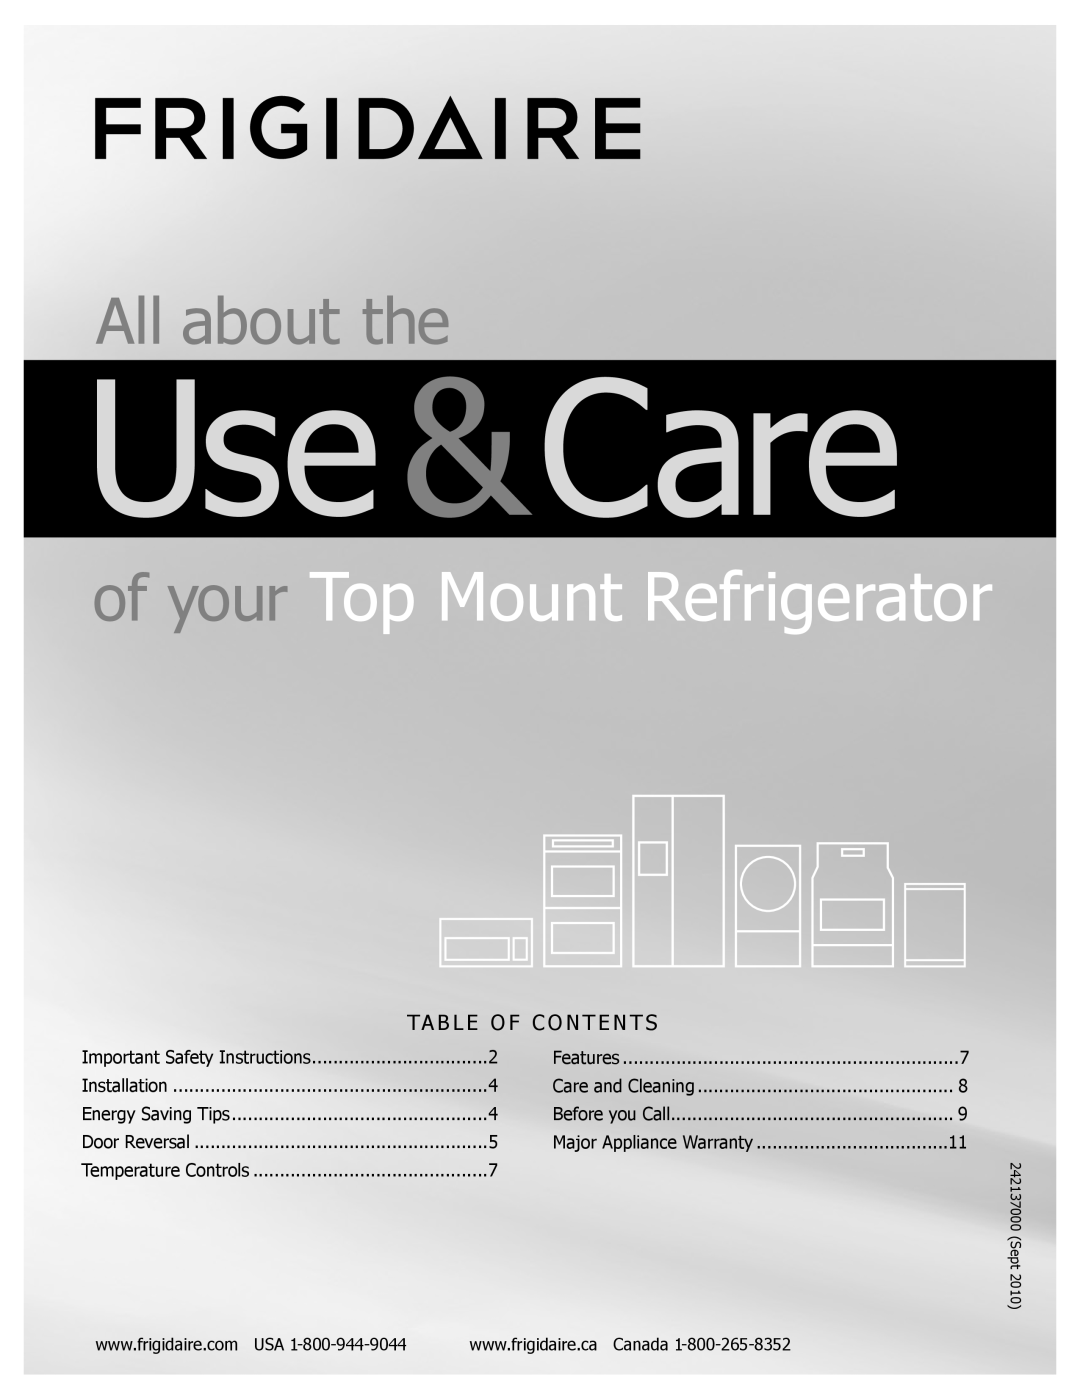 Frigidaire FFHT10F2LW important safety instructions Use &Care, of your Top Mount Refrigerator, All about the, Features 